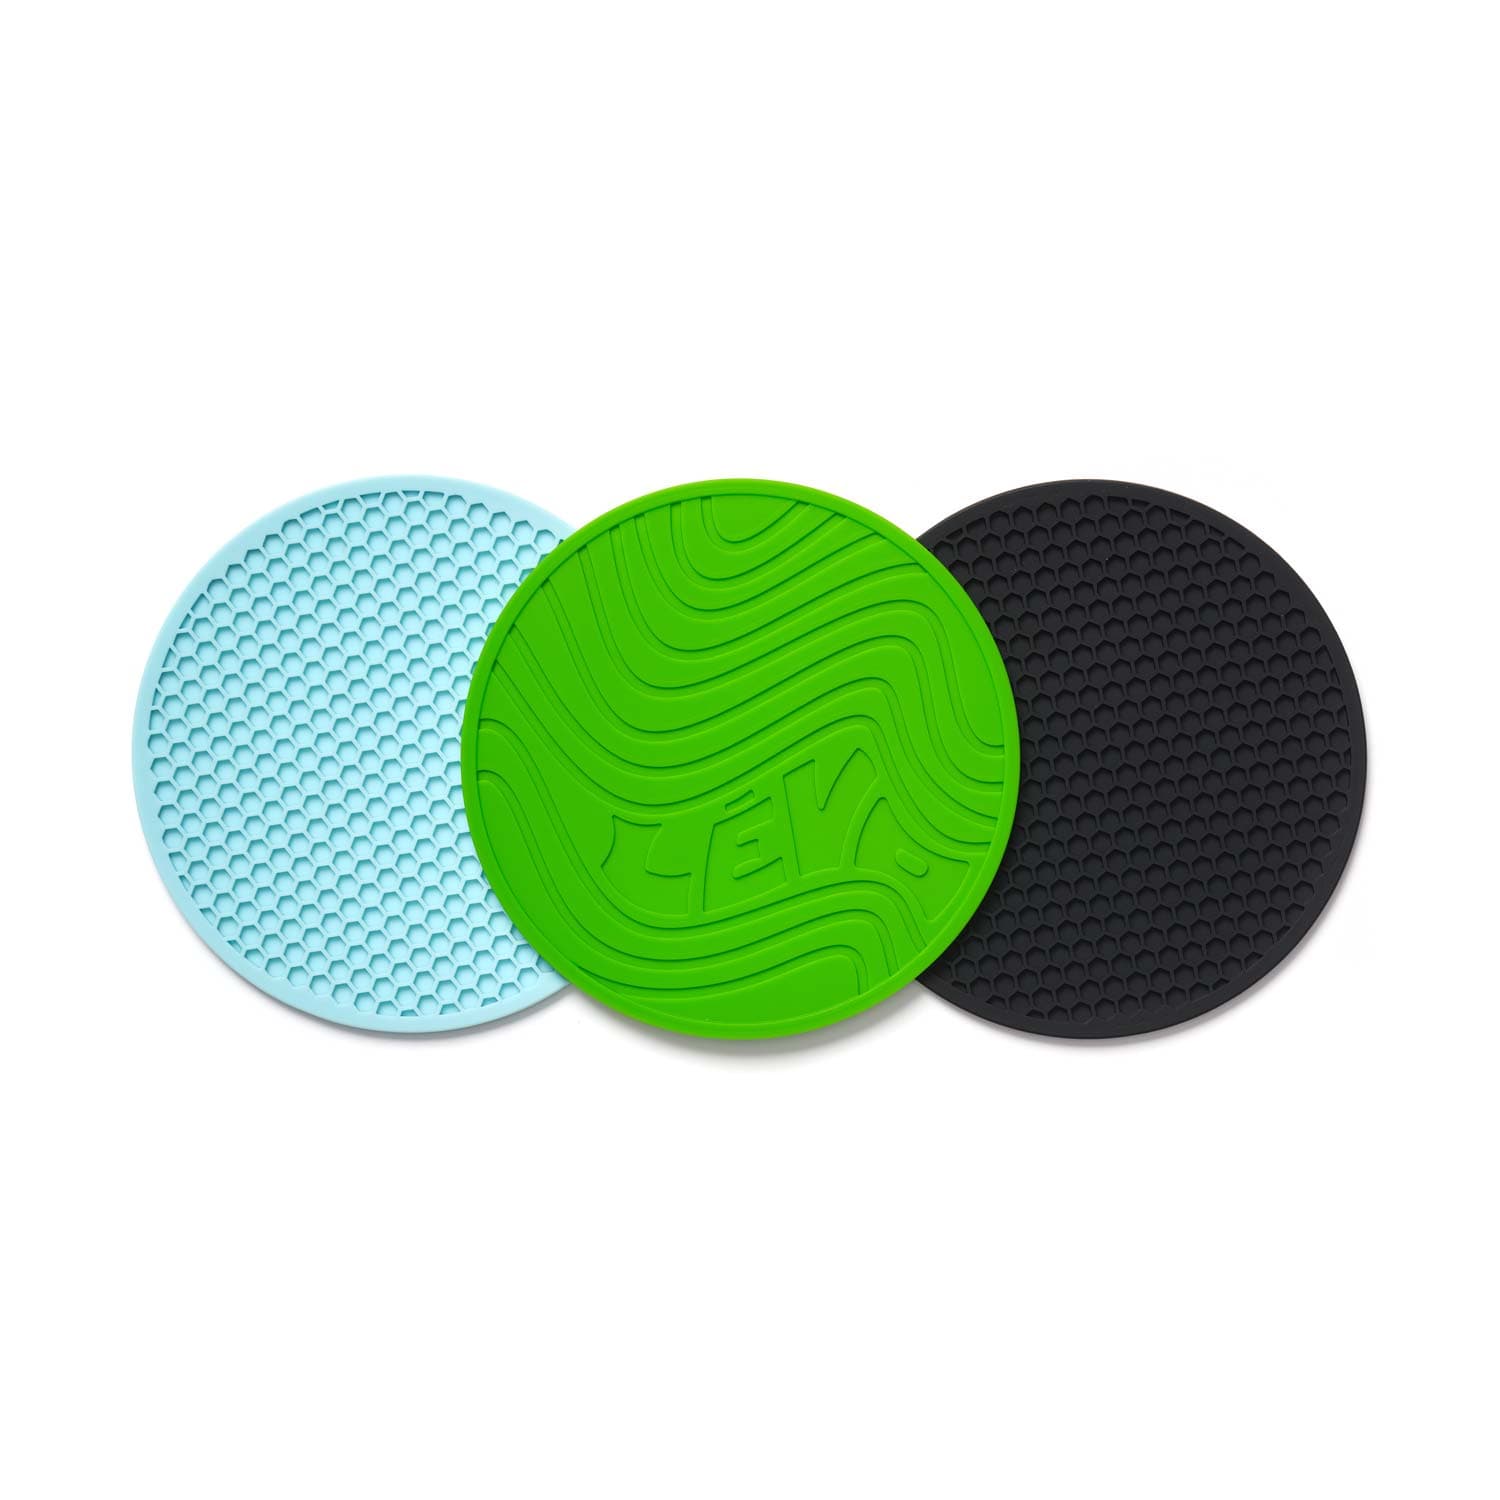 LEVO Silicone Trivets in green, blue, and black back part